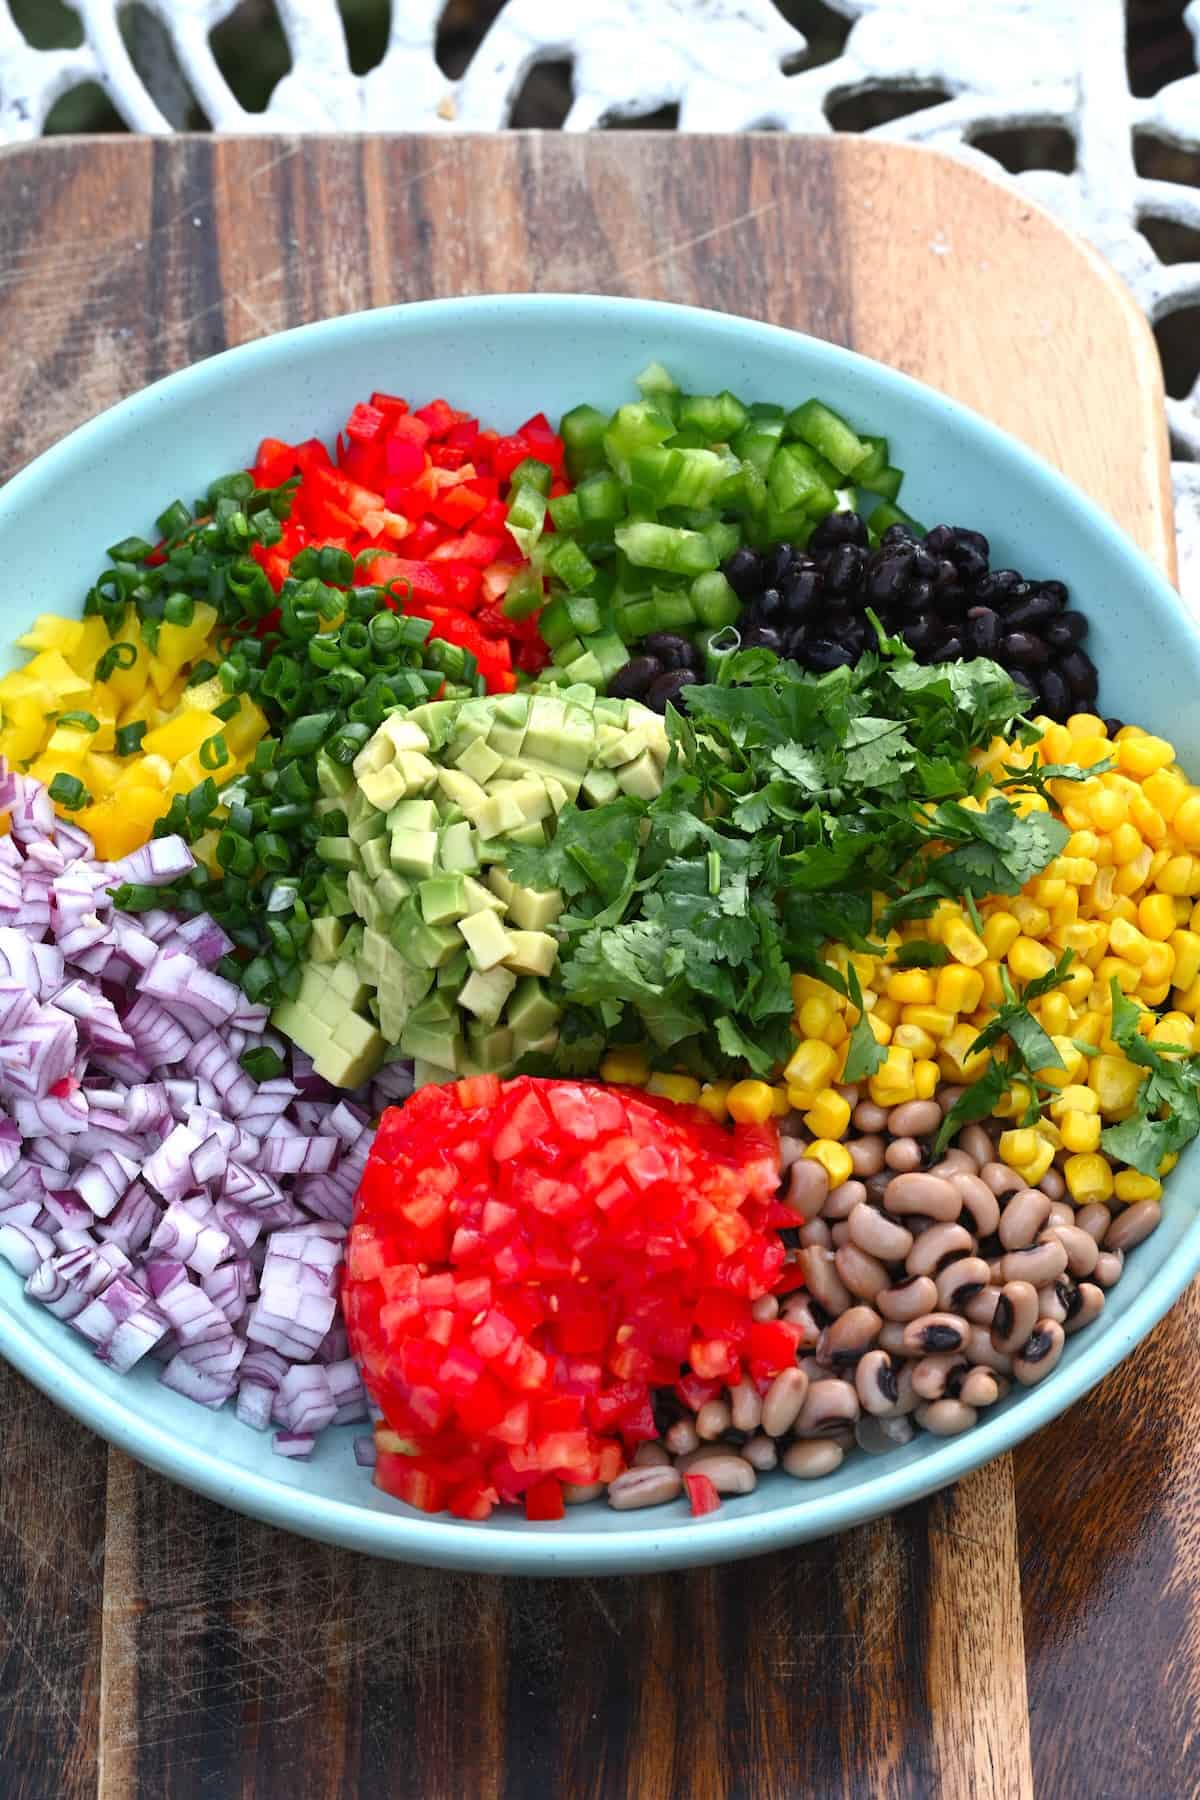 Chopped ingredients in a big mixing bowls